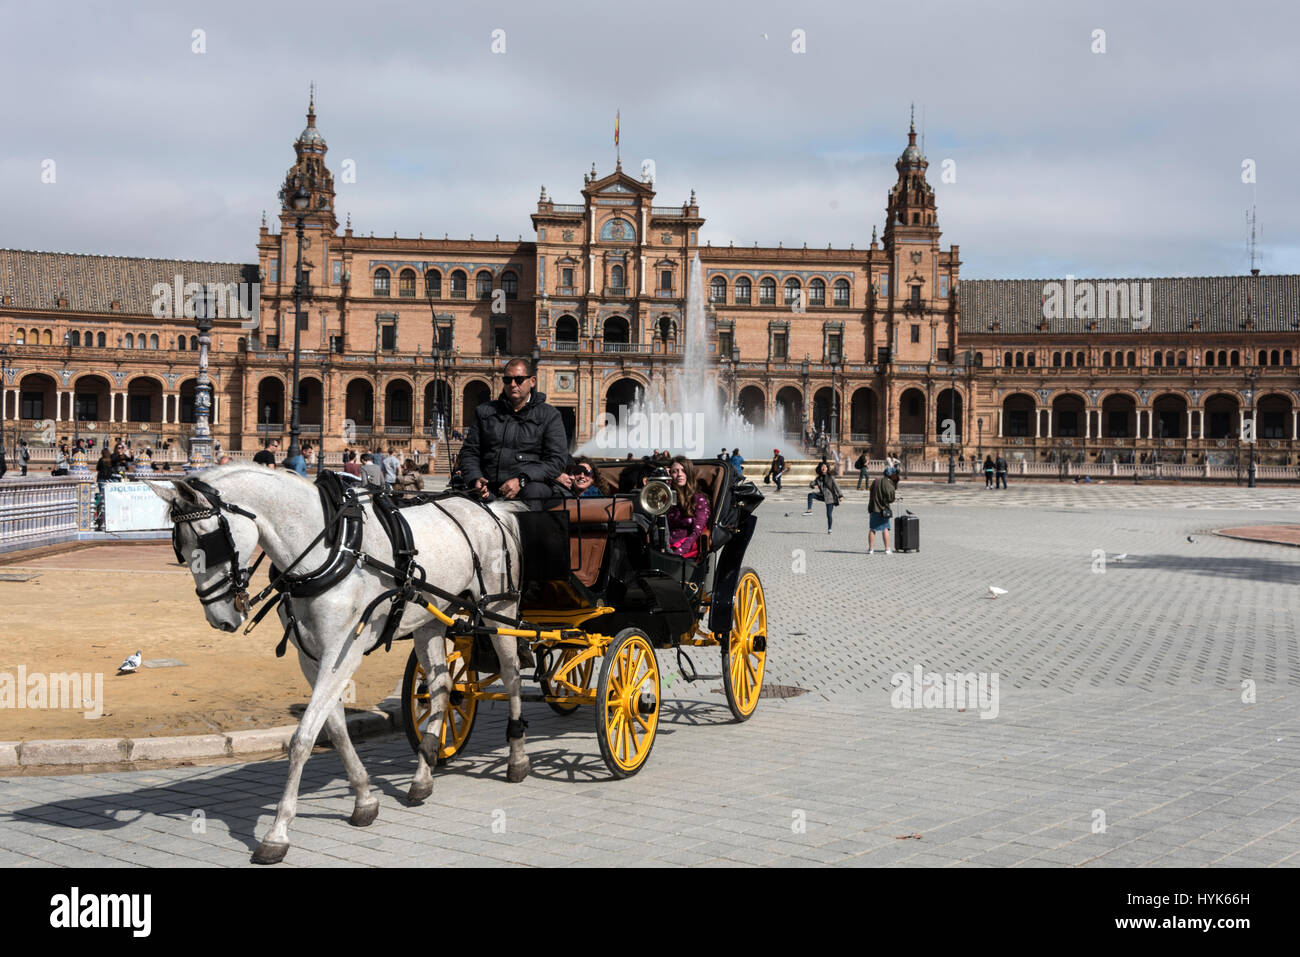 A horse & carriage giving tourist a guided tour at  the semi-circle frontage of the  Plaza de Espana, a popular venue in Seville, Spain.   The site is Stock Photo